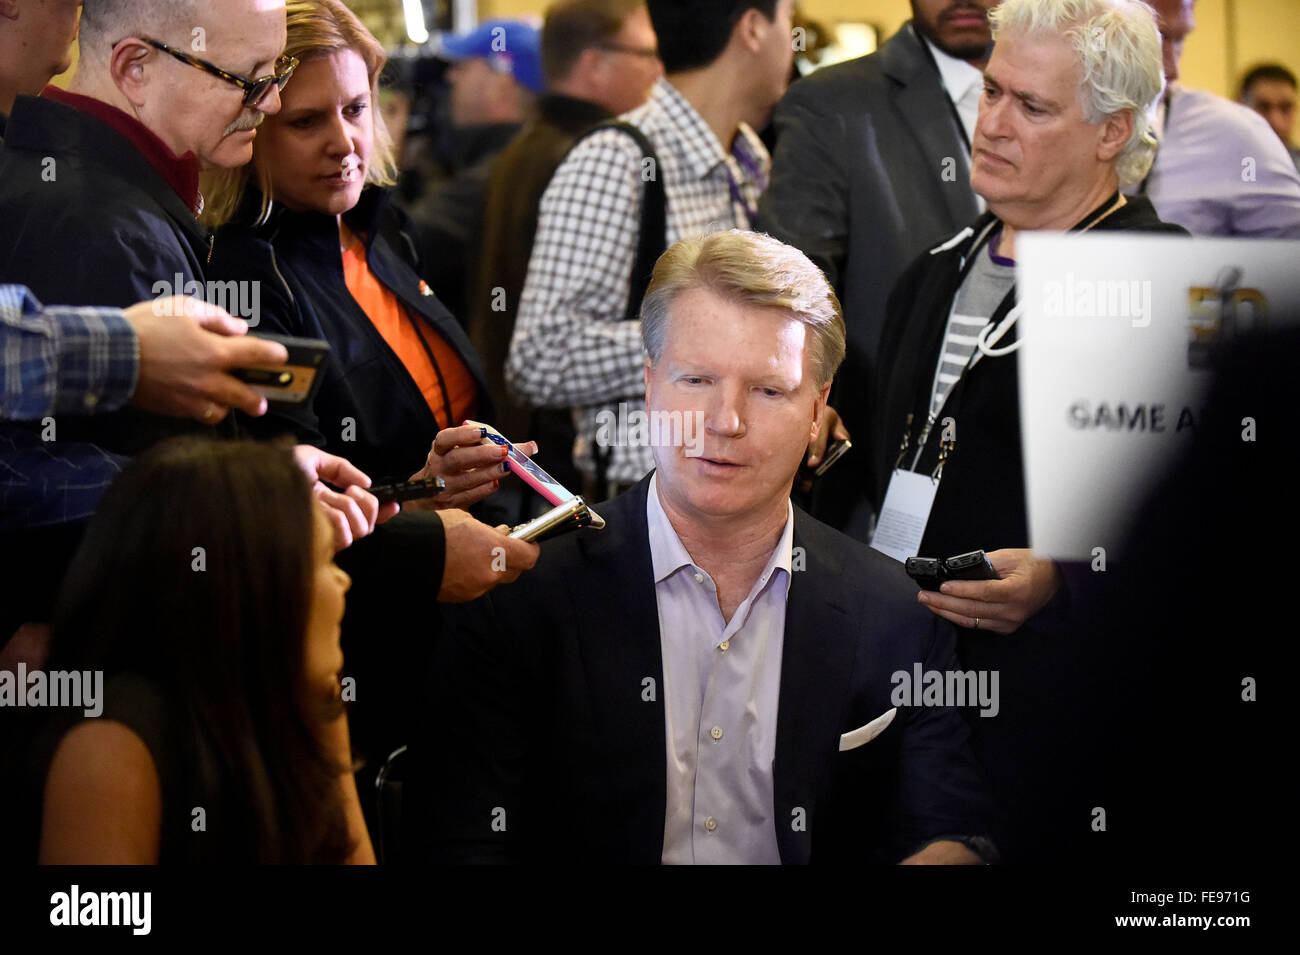 Monday, February 1, 2016: CBS sportscaster Phil Simms talks to members of the media during opening day of press conferences for the National Football League Super Bowl 50 between the Denver Broncos and the Carolina Panthers at the Moscone Center in San Francisco, California. Eric Canha/CSM Stock Photo